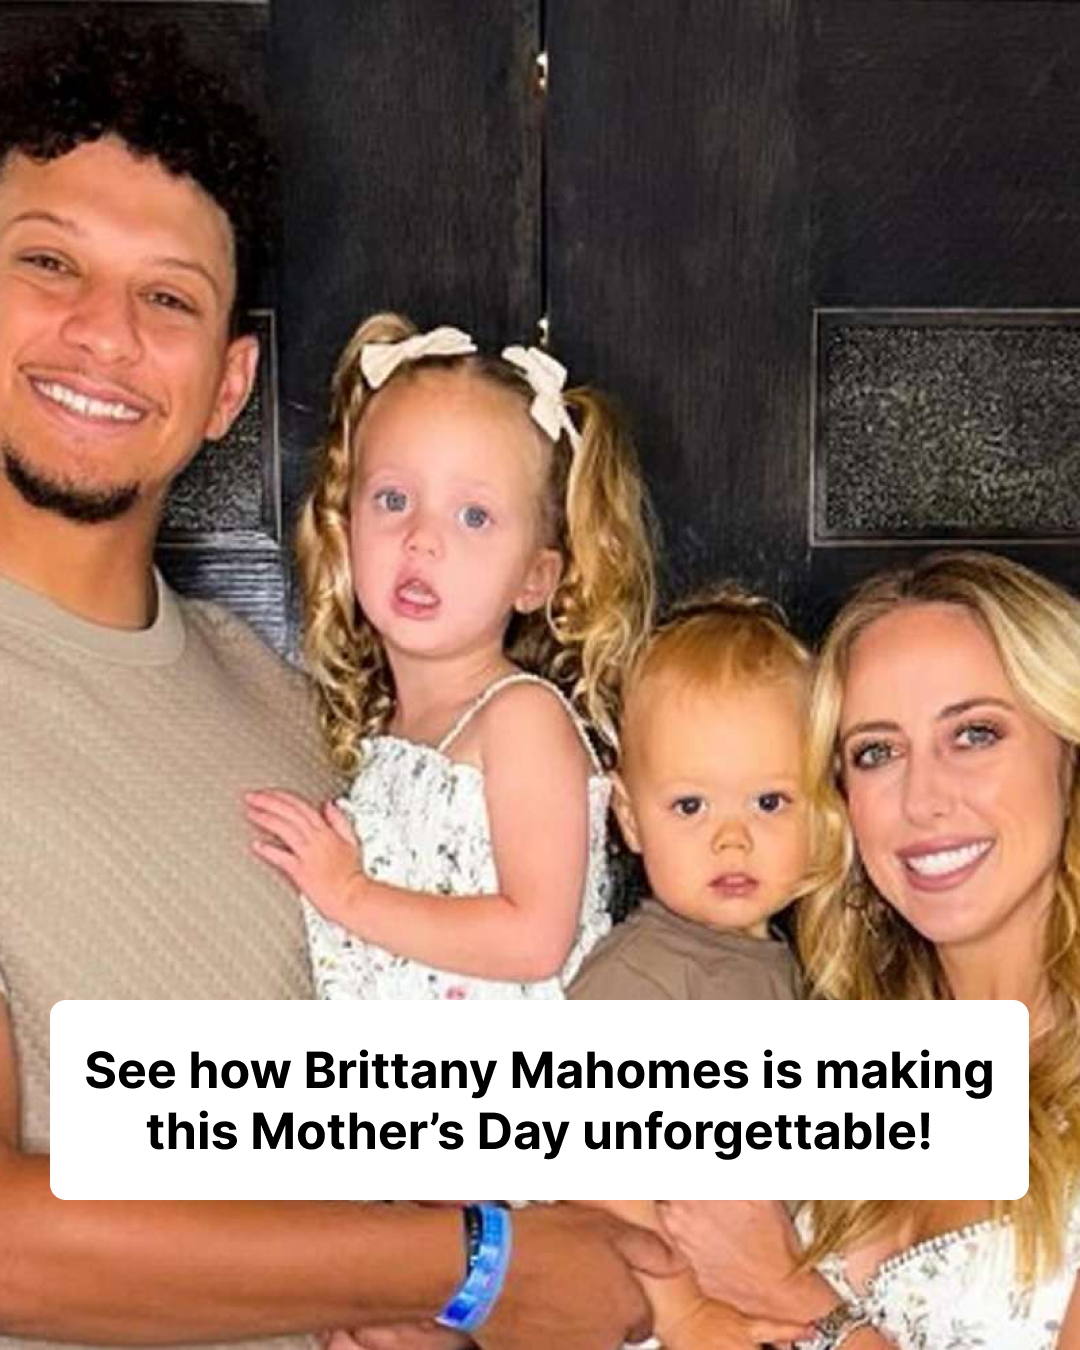 Patrick Mahomes Celebrates Wife Brittany on Mother’s Day — and Travis Kelce Gives a Sweet Shoutout!